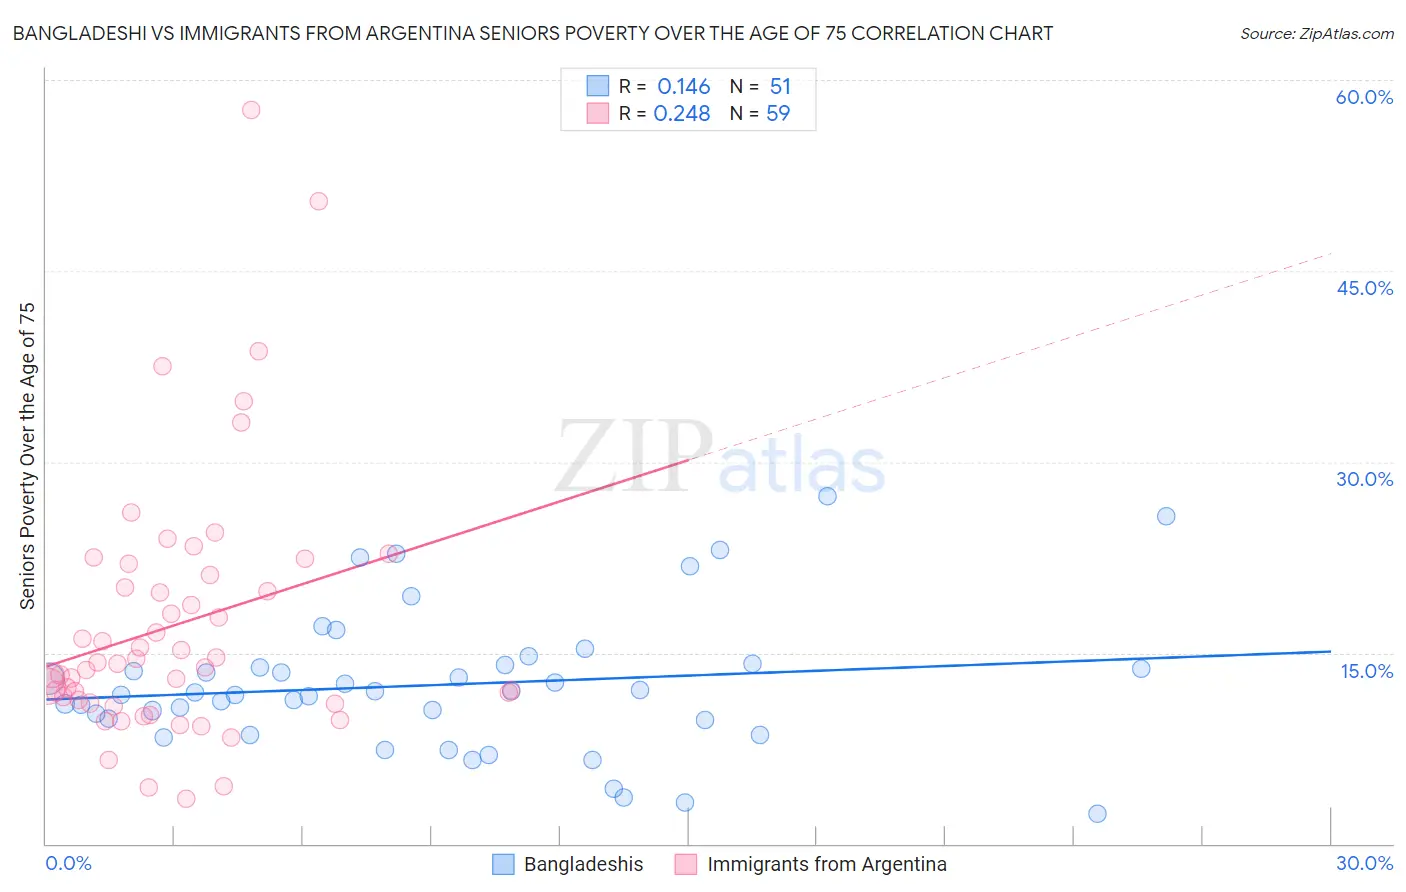 Bangladeshi vs Immigrants from Argentina Seniors Poverty Over the Age of 75